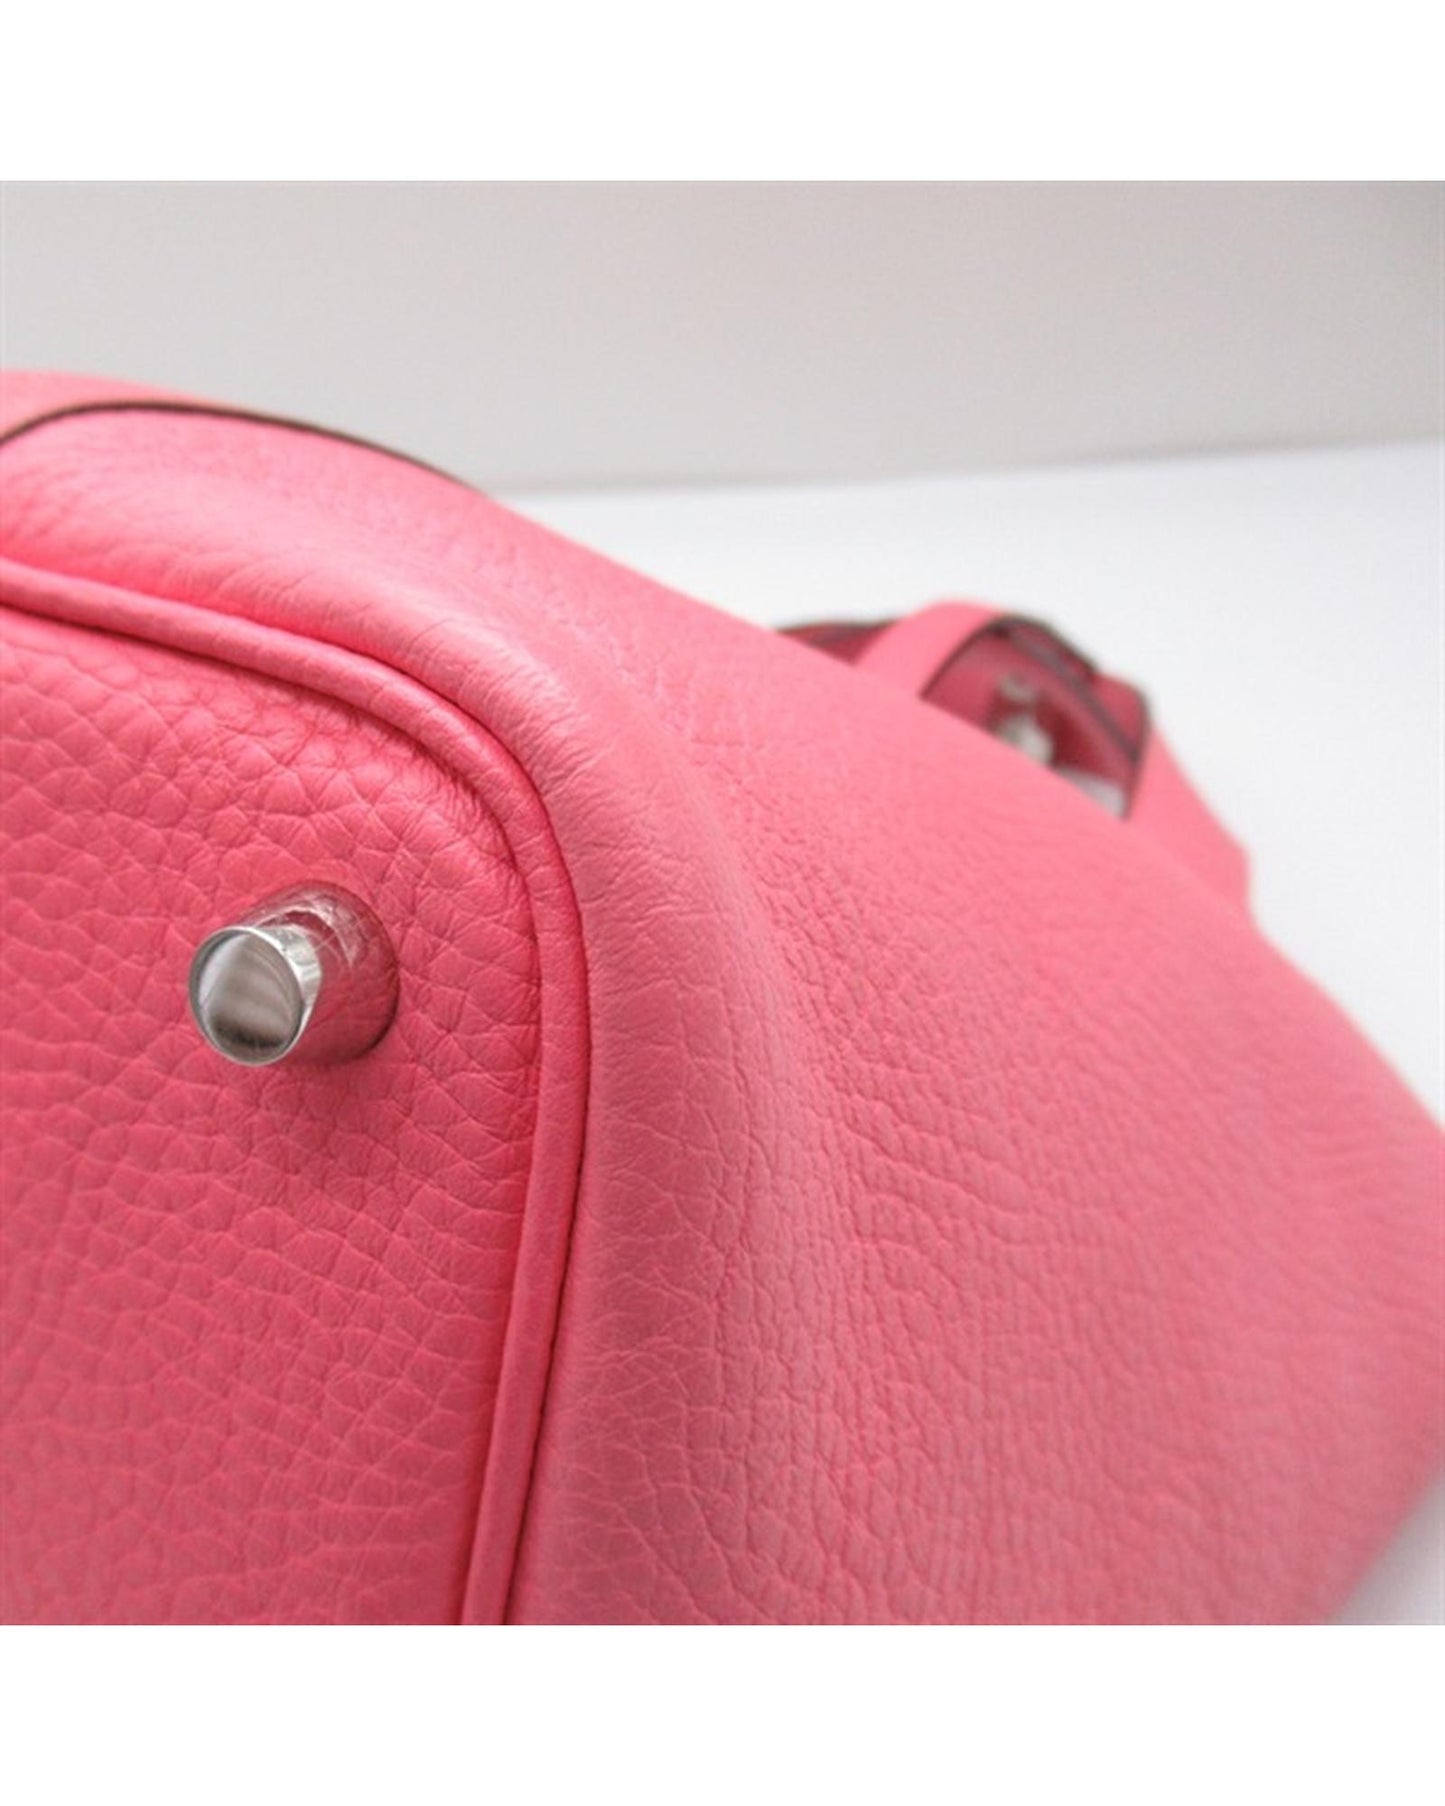 Hermes Women's Pink Leather Picotin Lock Bag in Excellent Condition in Pink